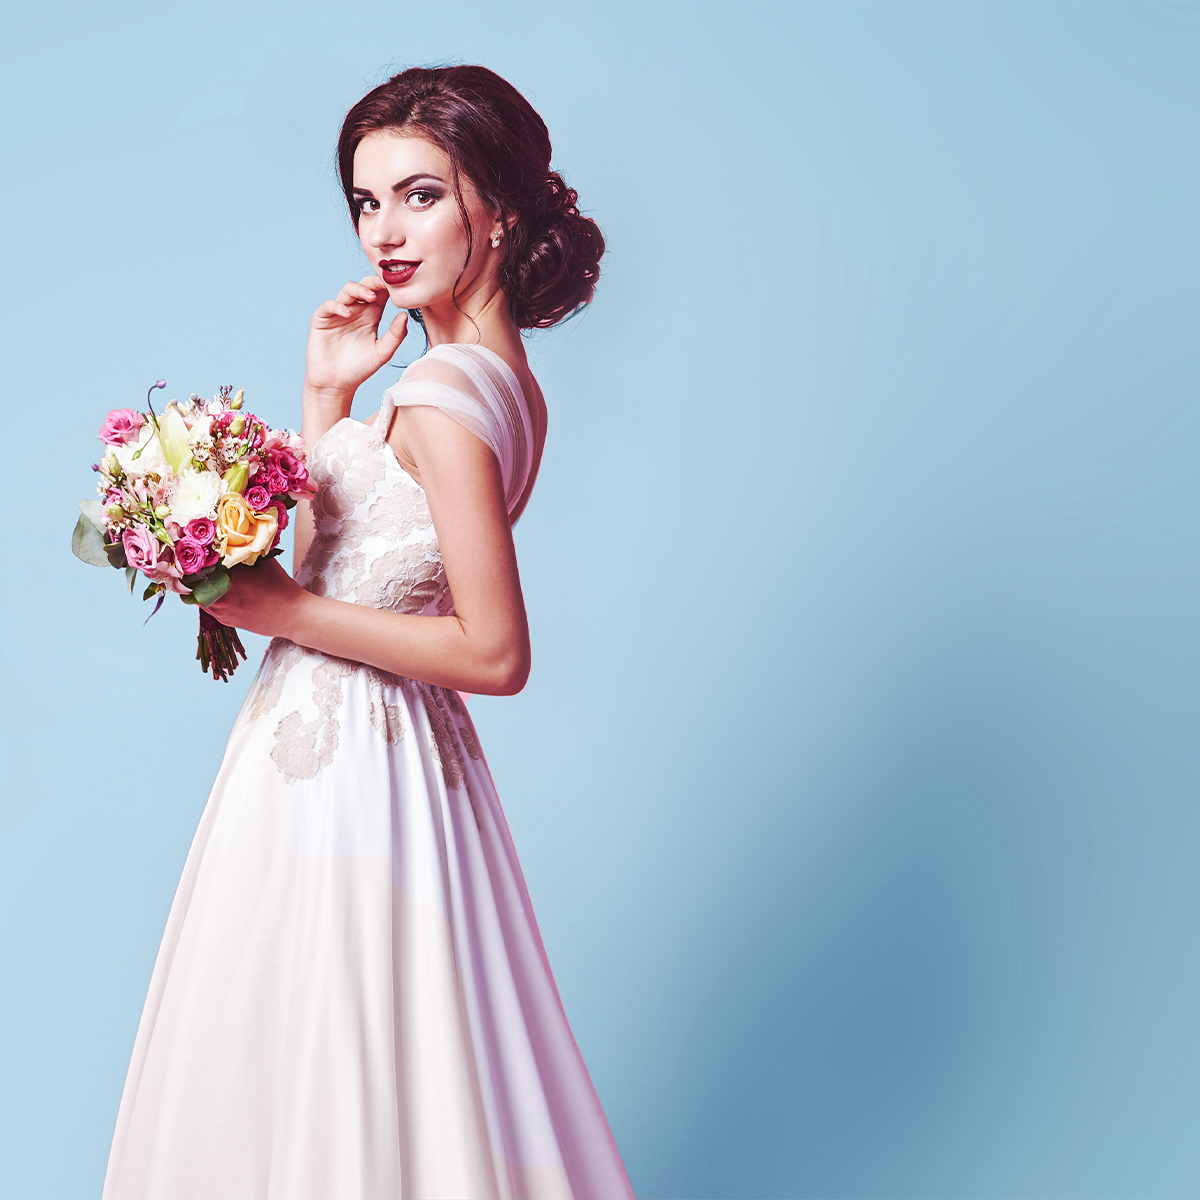 The Ultimate Guide to Preparing Your Clients for Spring and Wedding Season